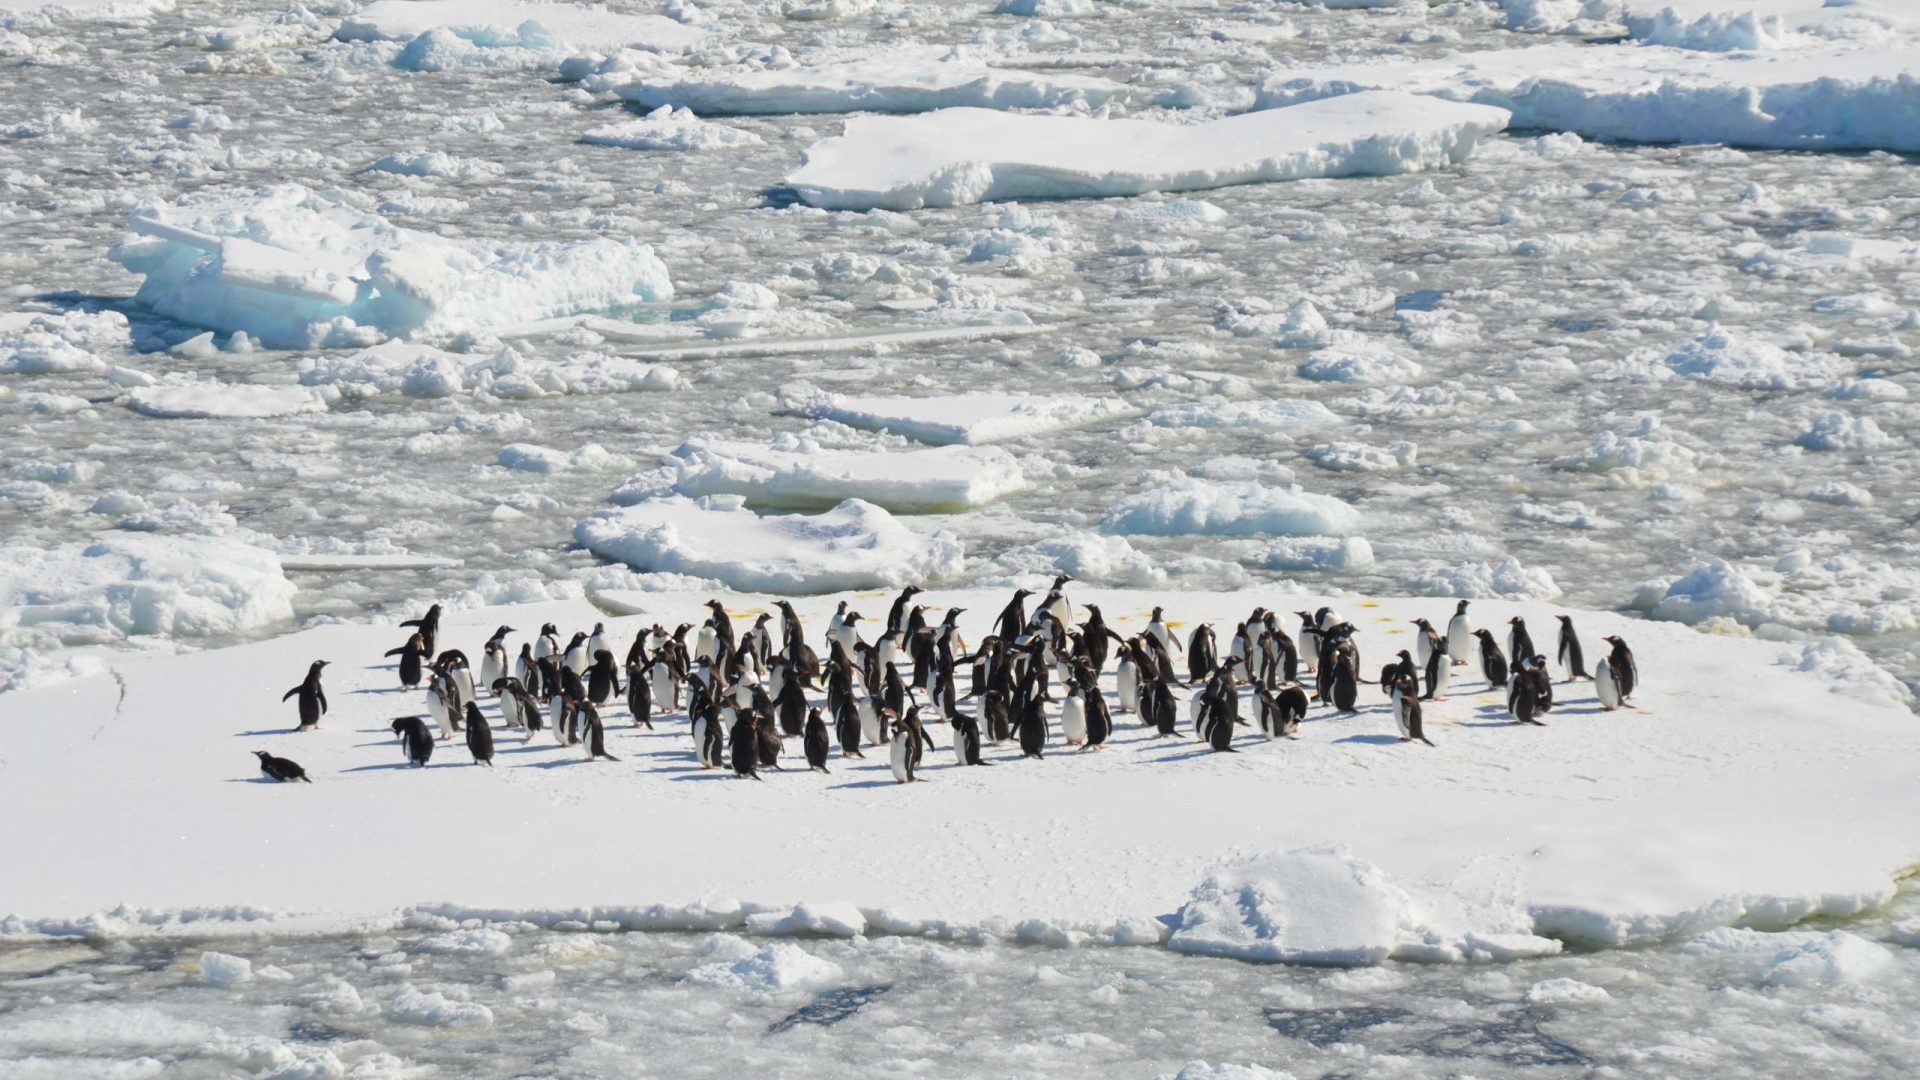 A colony of penguins on a sheet of ice.